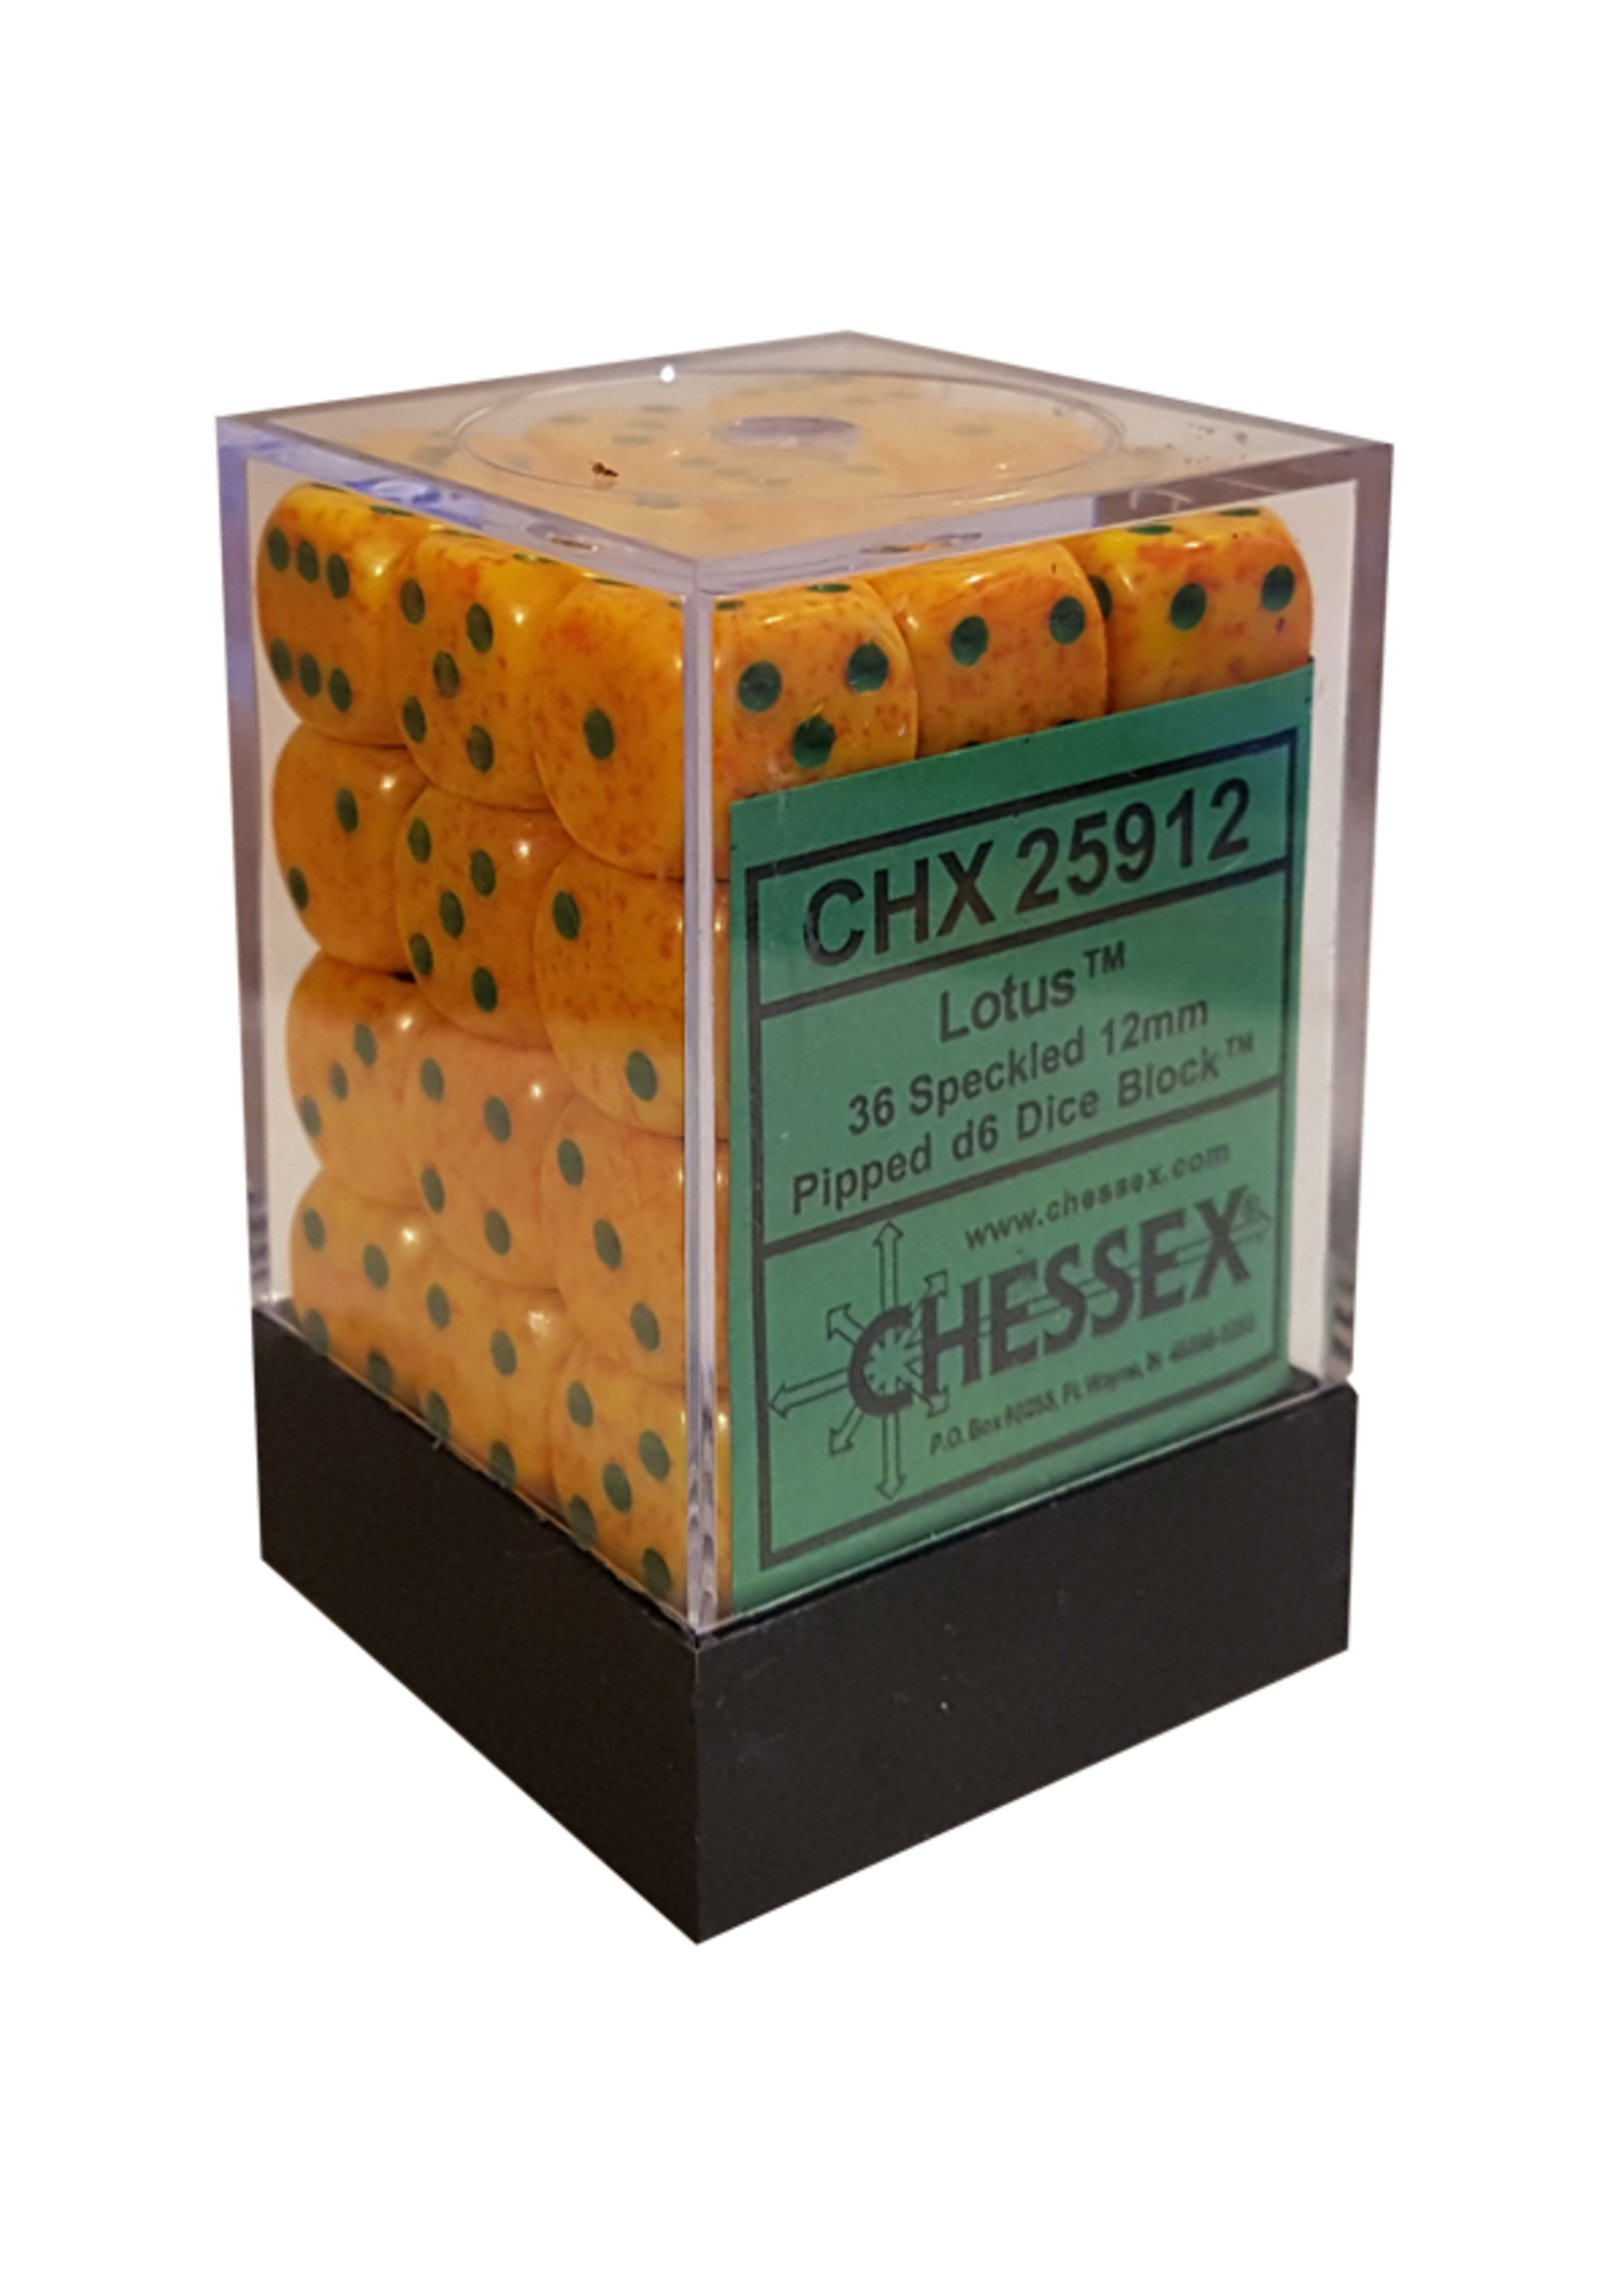 Chessex d6 Cube 12mm Speckled Lotus (36)